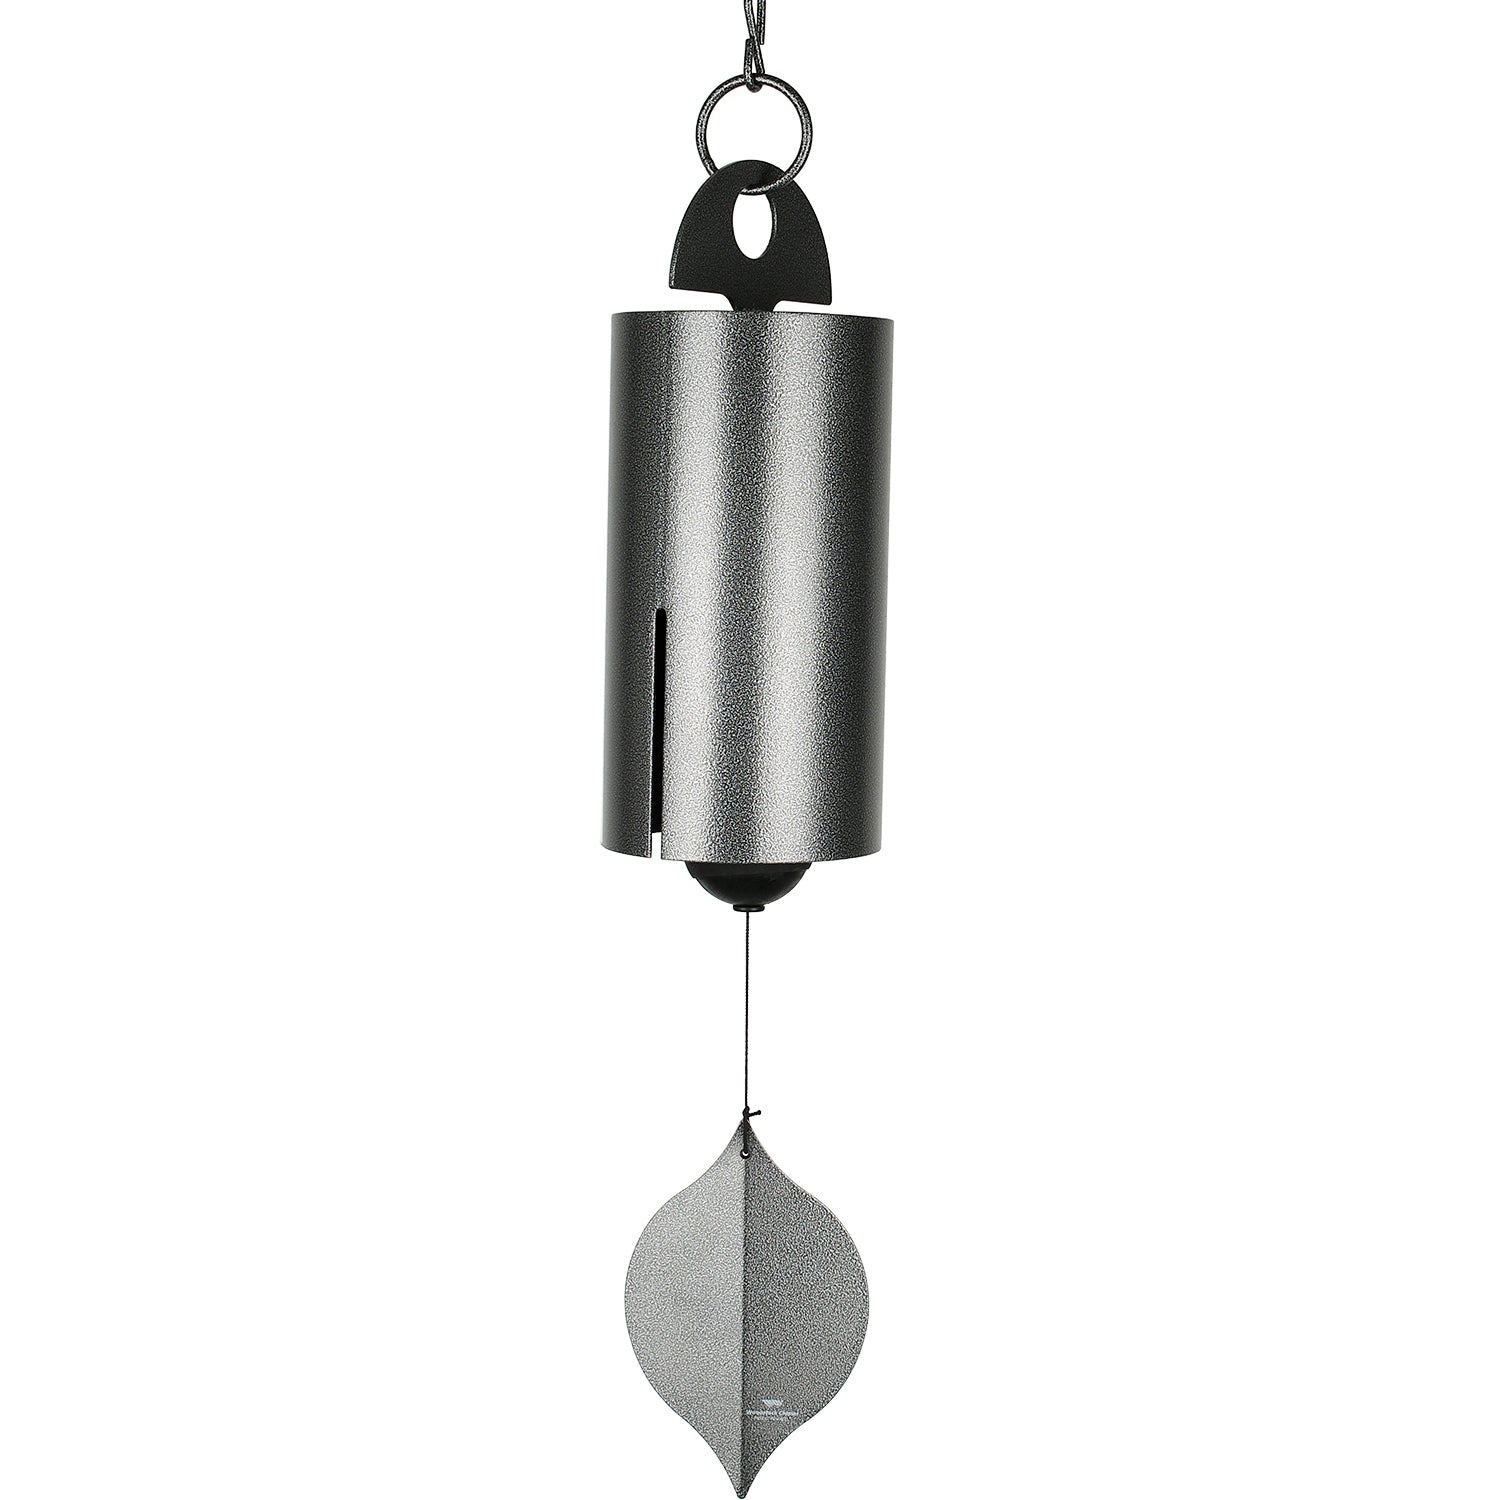 Large Heroic Windbell - Antique Silver    